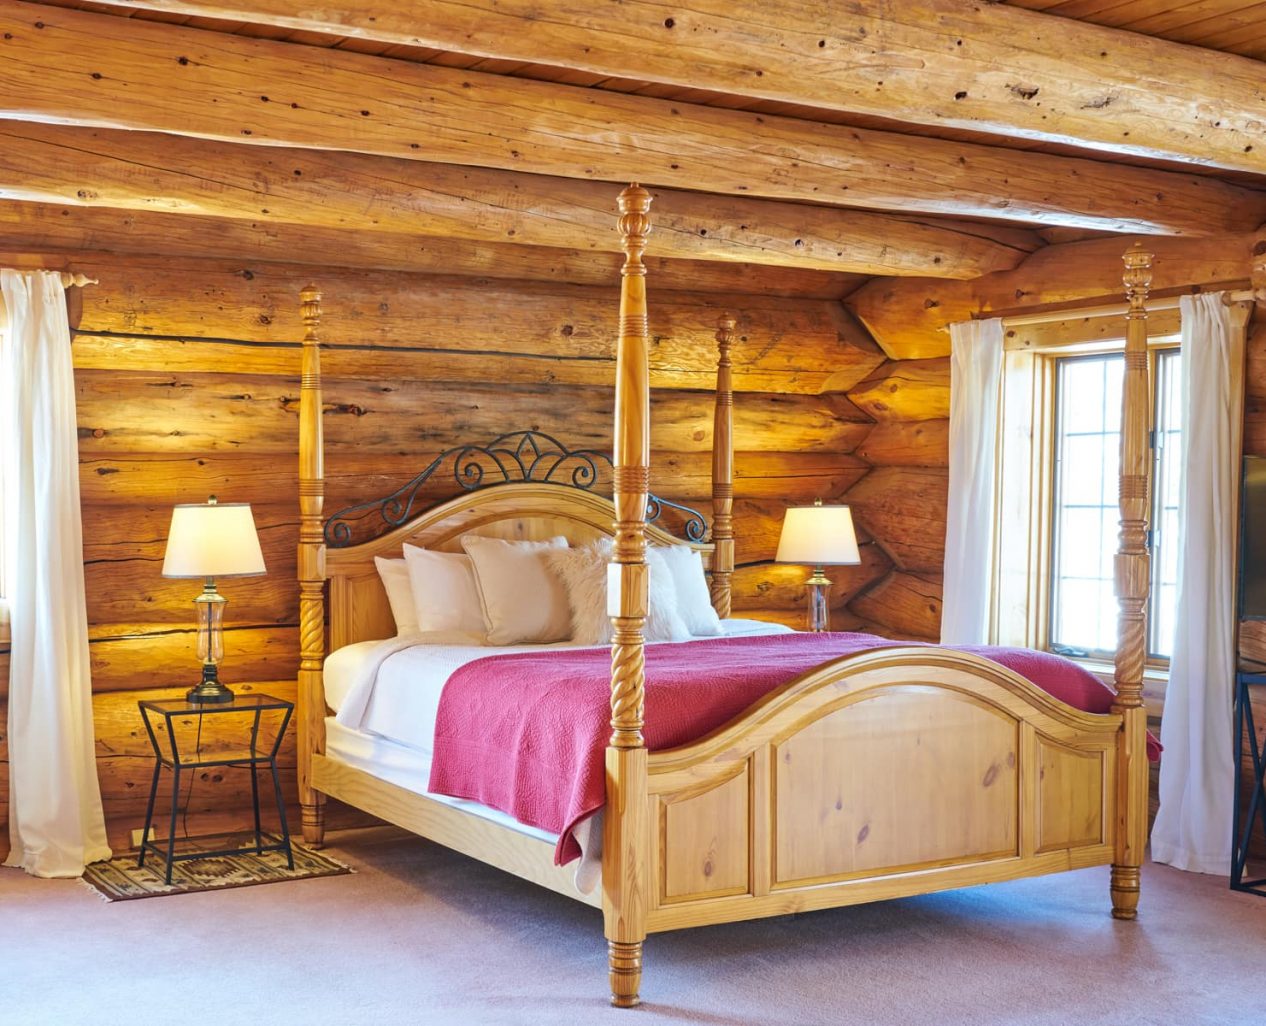 Four poster king bed in the Buckskin room